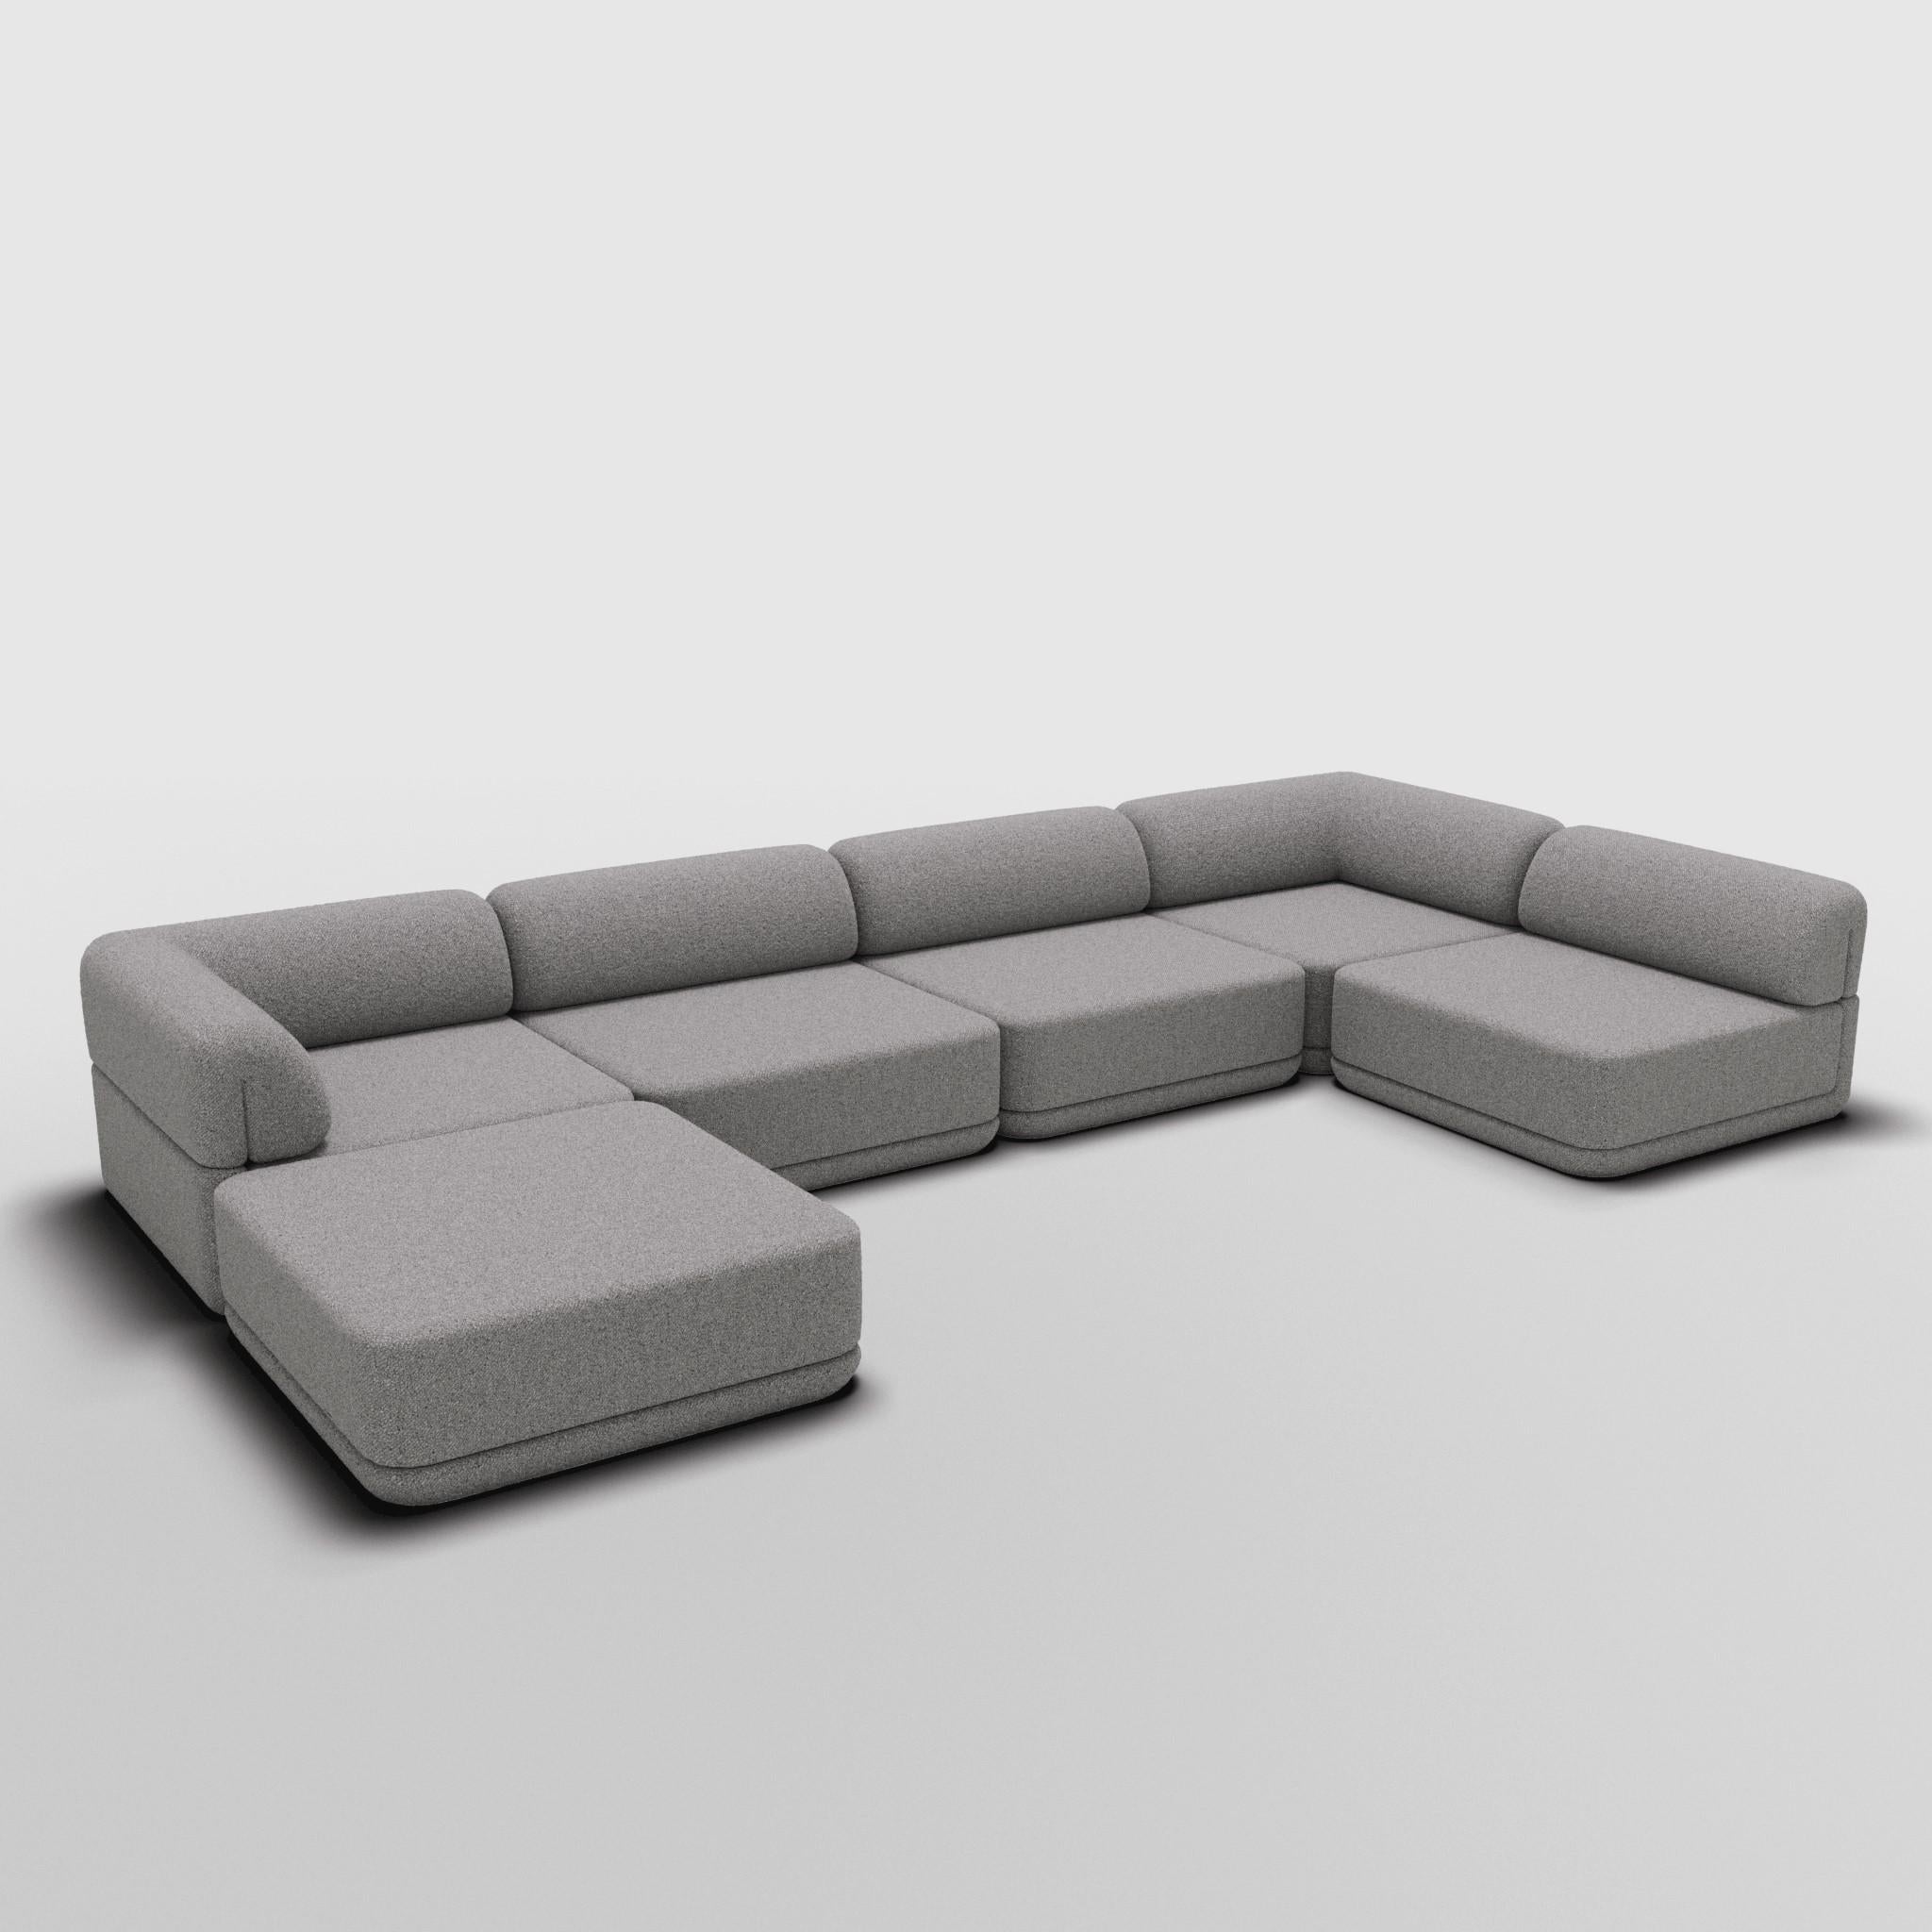 Mid-Century Modern The Cube Sofa - Low Lounge Sectional For Sale